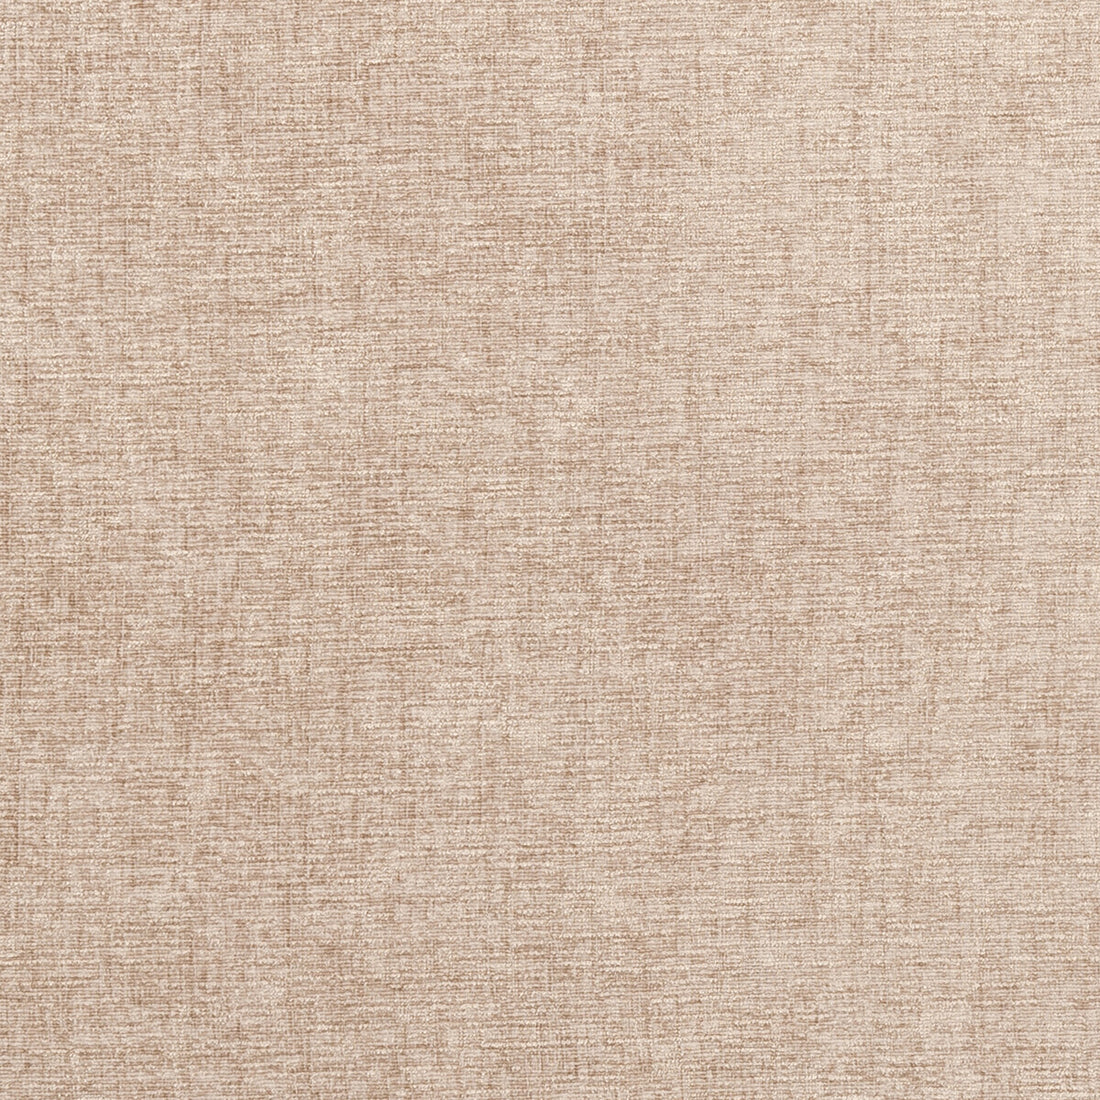 Karina fabric in taupe color - pattern F0371/31.CAC.0 - by Clarke And Clarke in the Clarke &amp; Clarke Karina collection